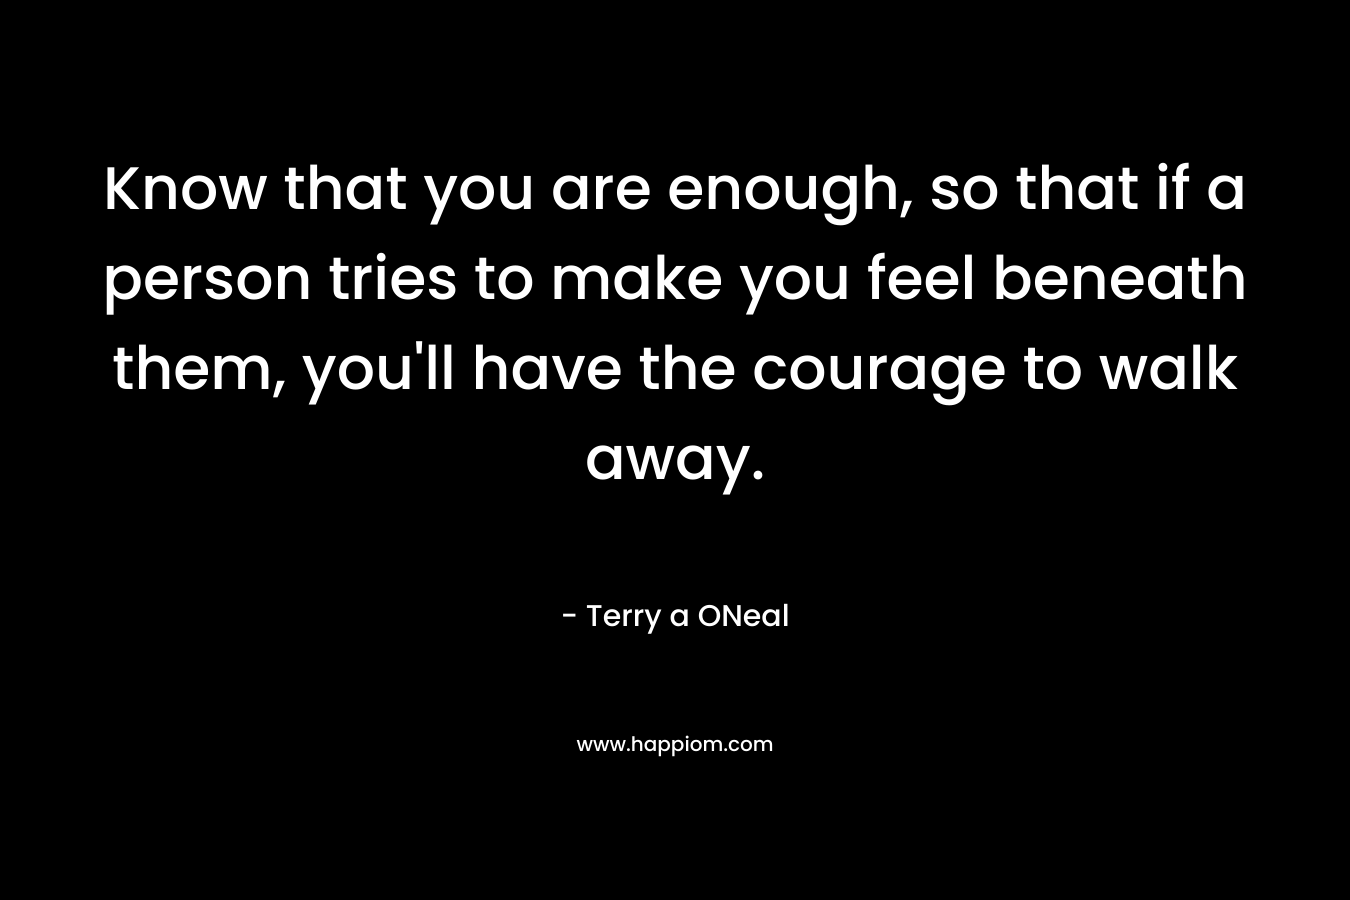 Know that you are enough, so that if a person tries to make you feel beneath them, you'll have the courage to walk away.